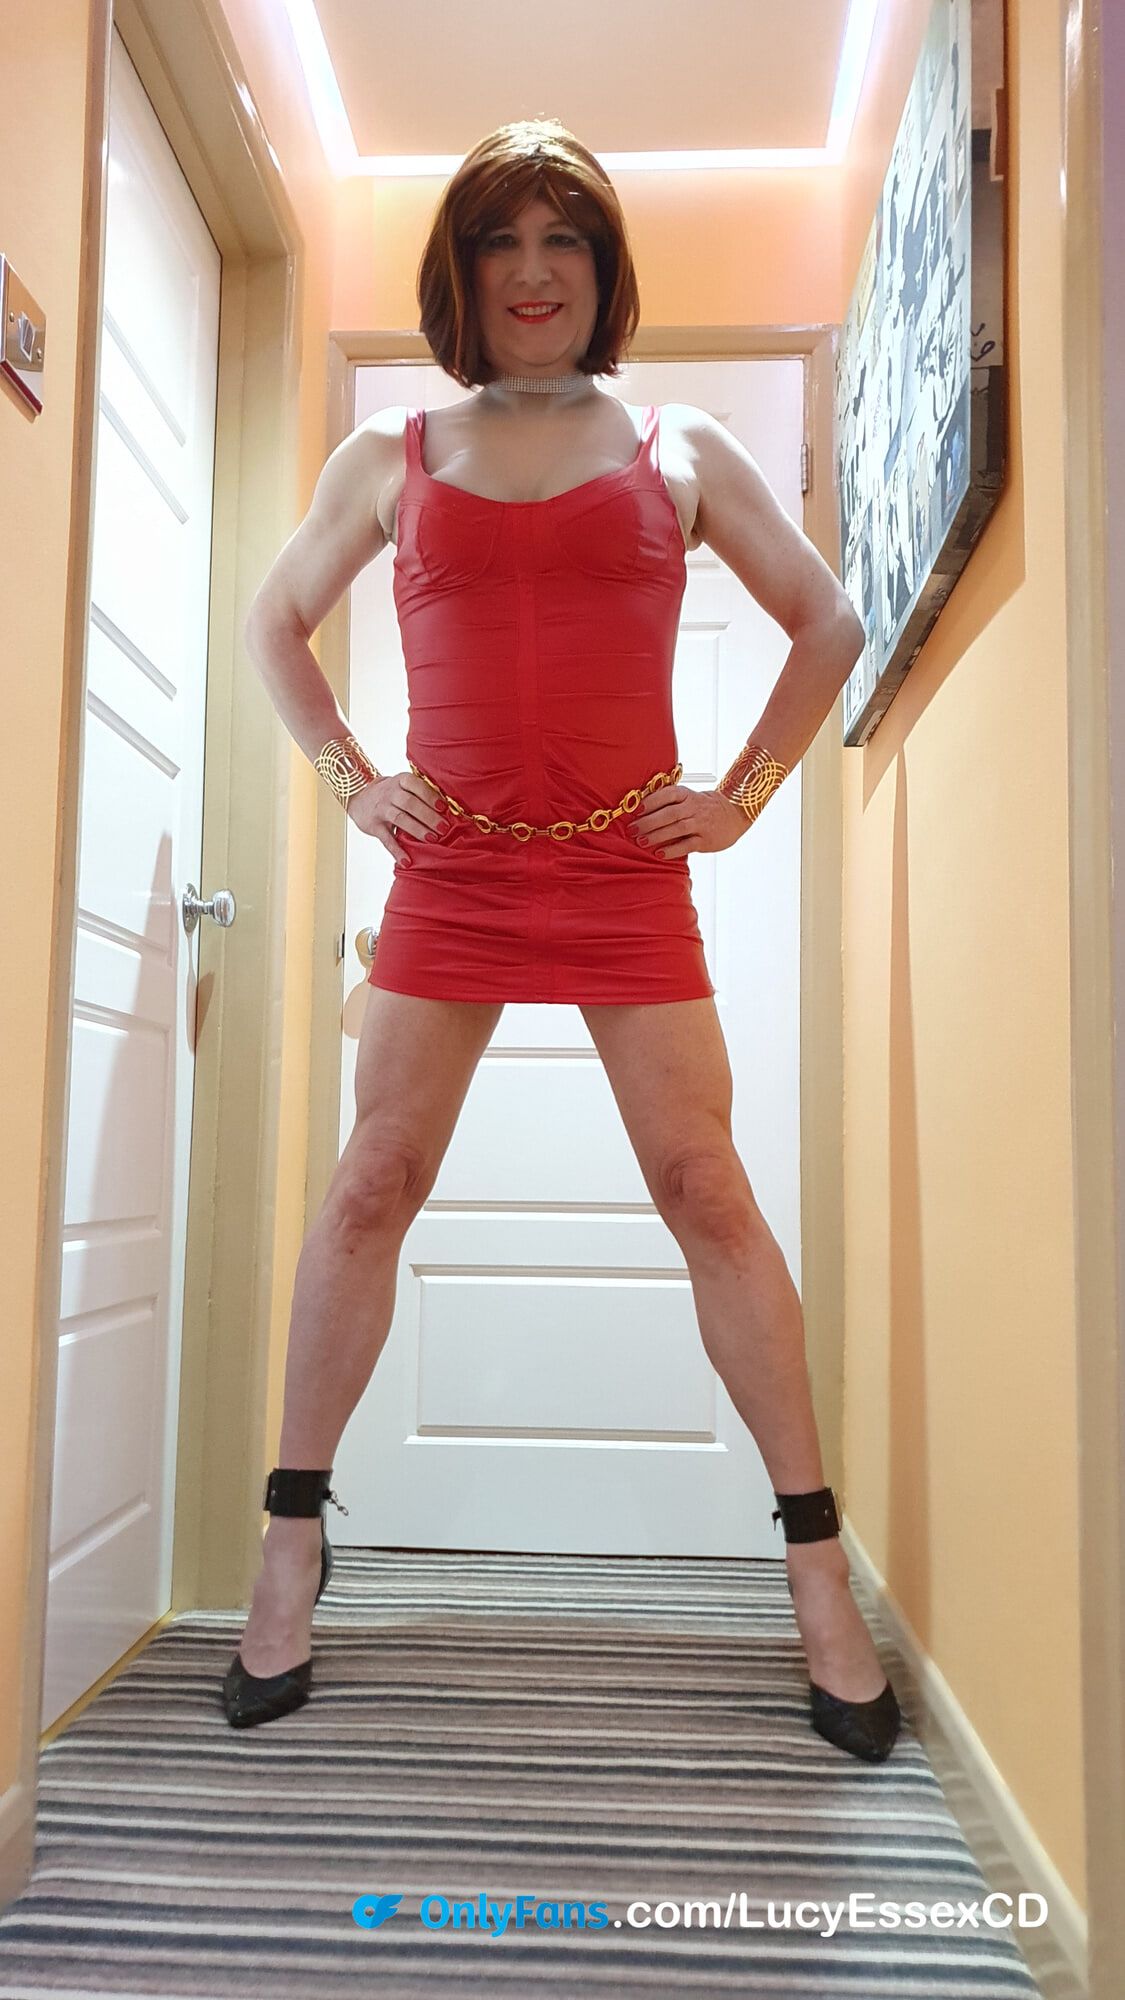 Sexy Sissy Lucy Essex CD showing off in red wet look dress #11